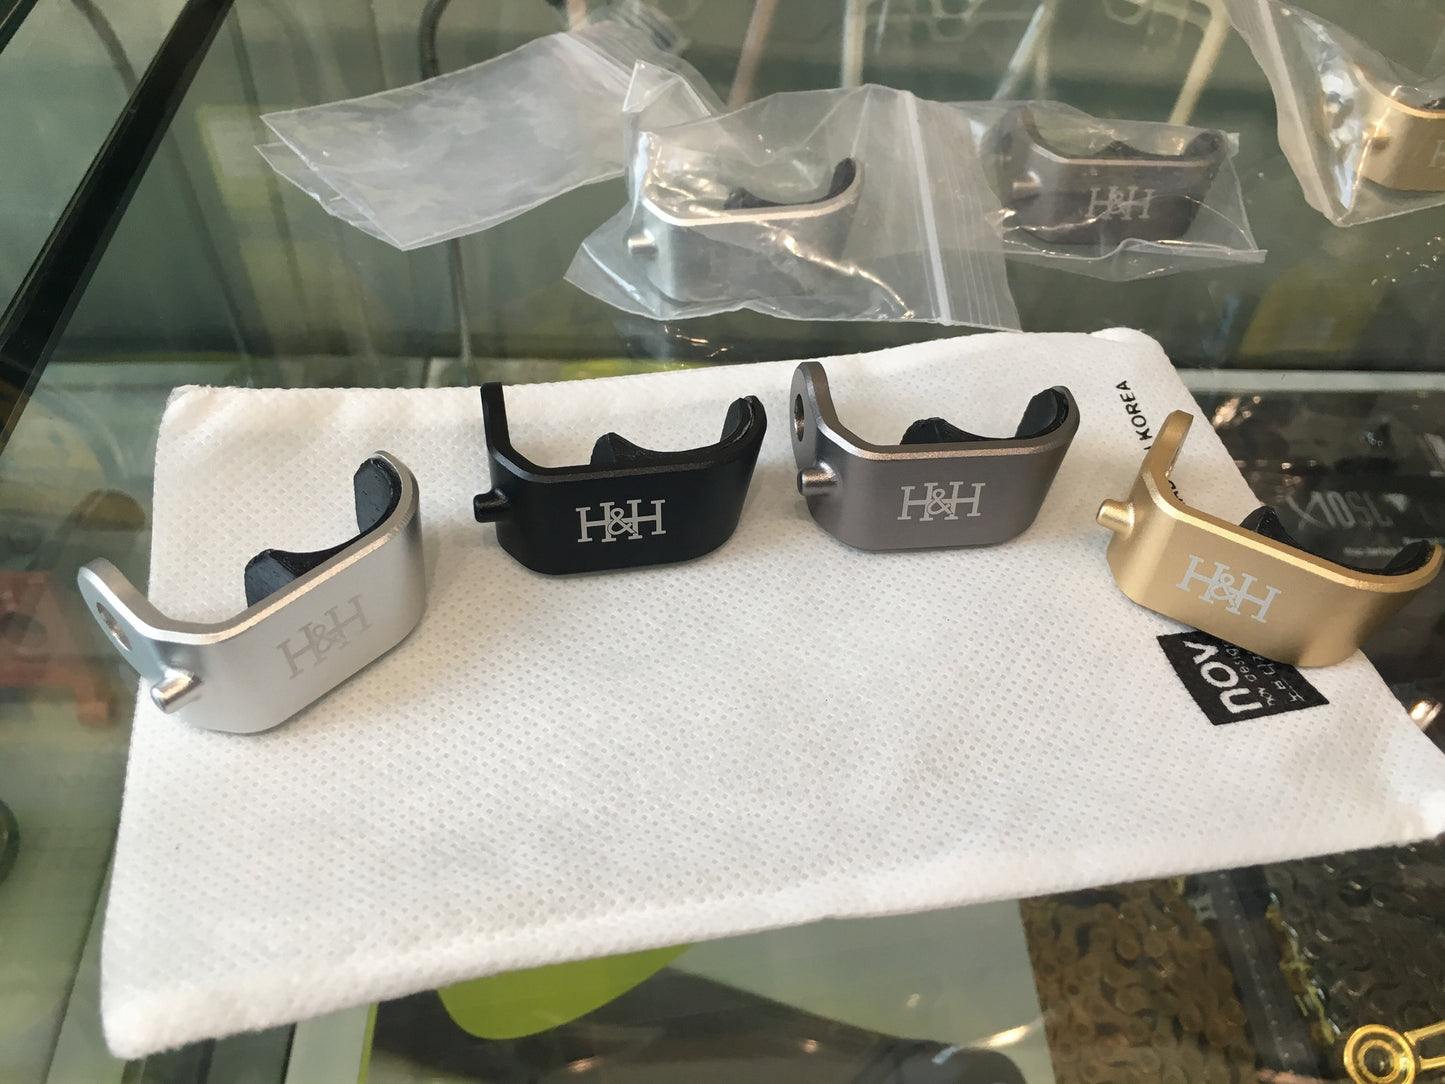 H&H Front Hook for E type Brompton